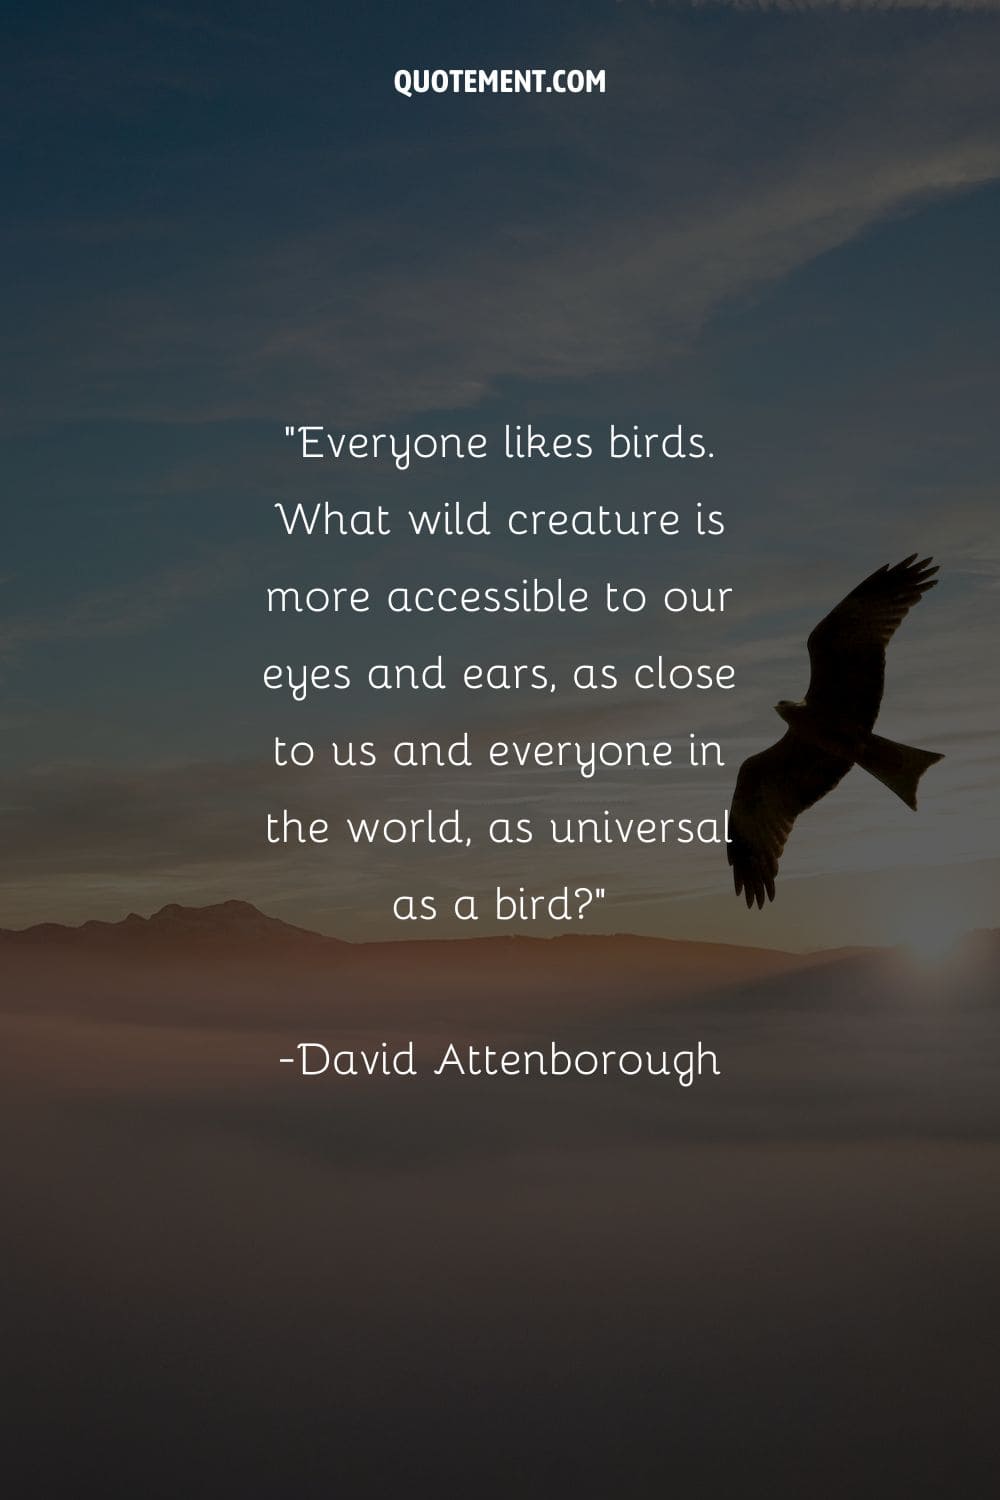 eagle soaring over untouched wilderness representing top bird quote